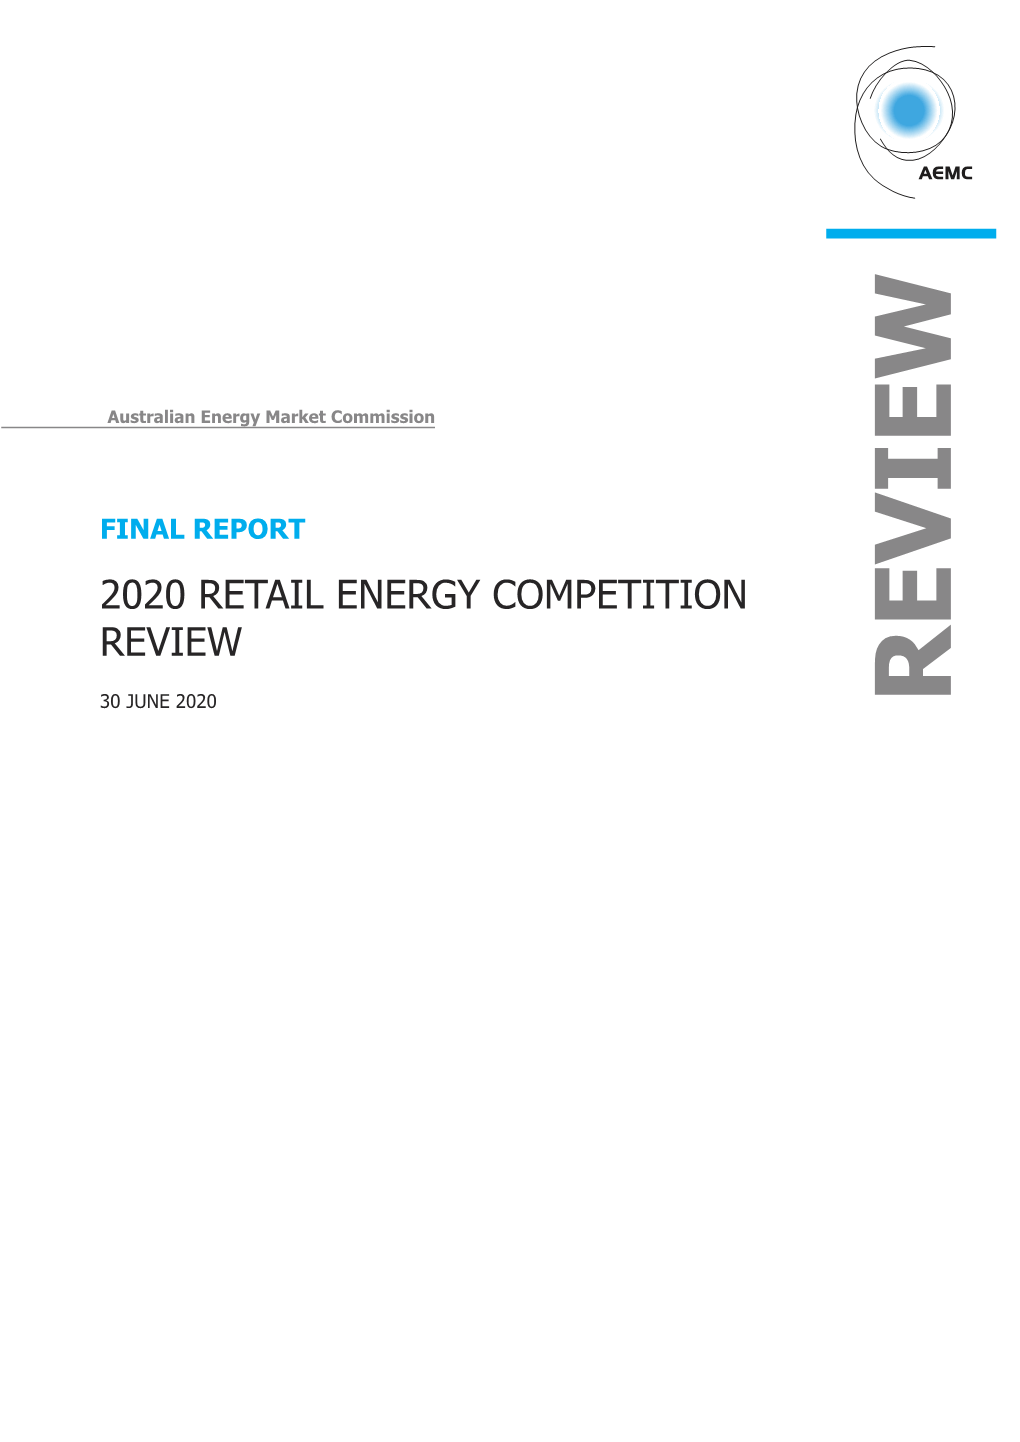 2020 Retail Energy Competition Review